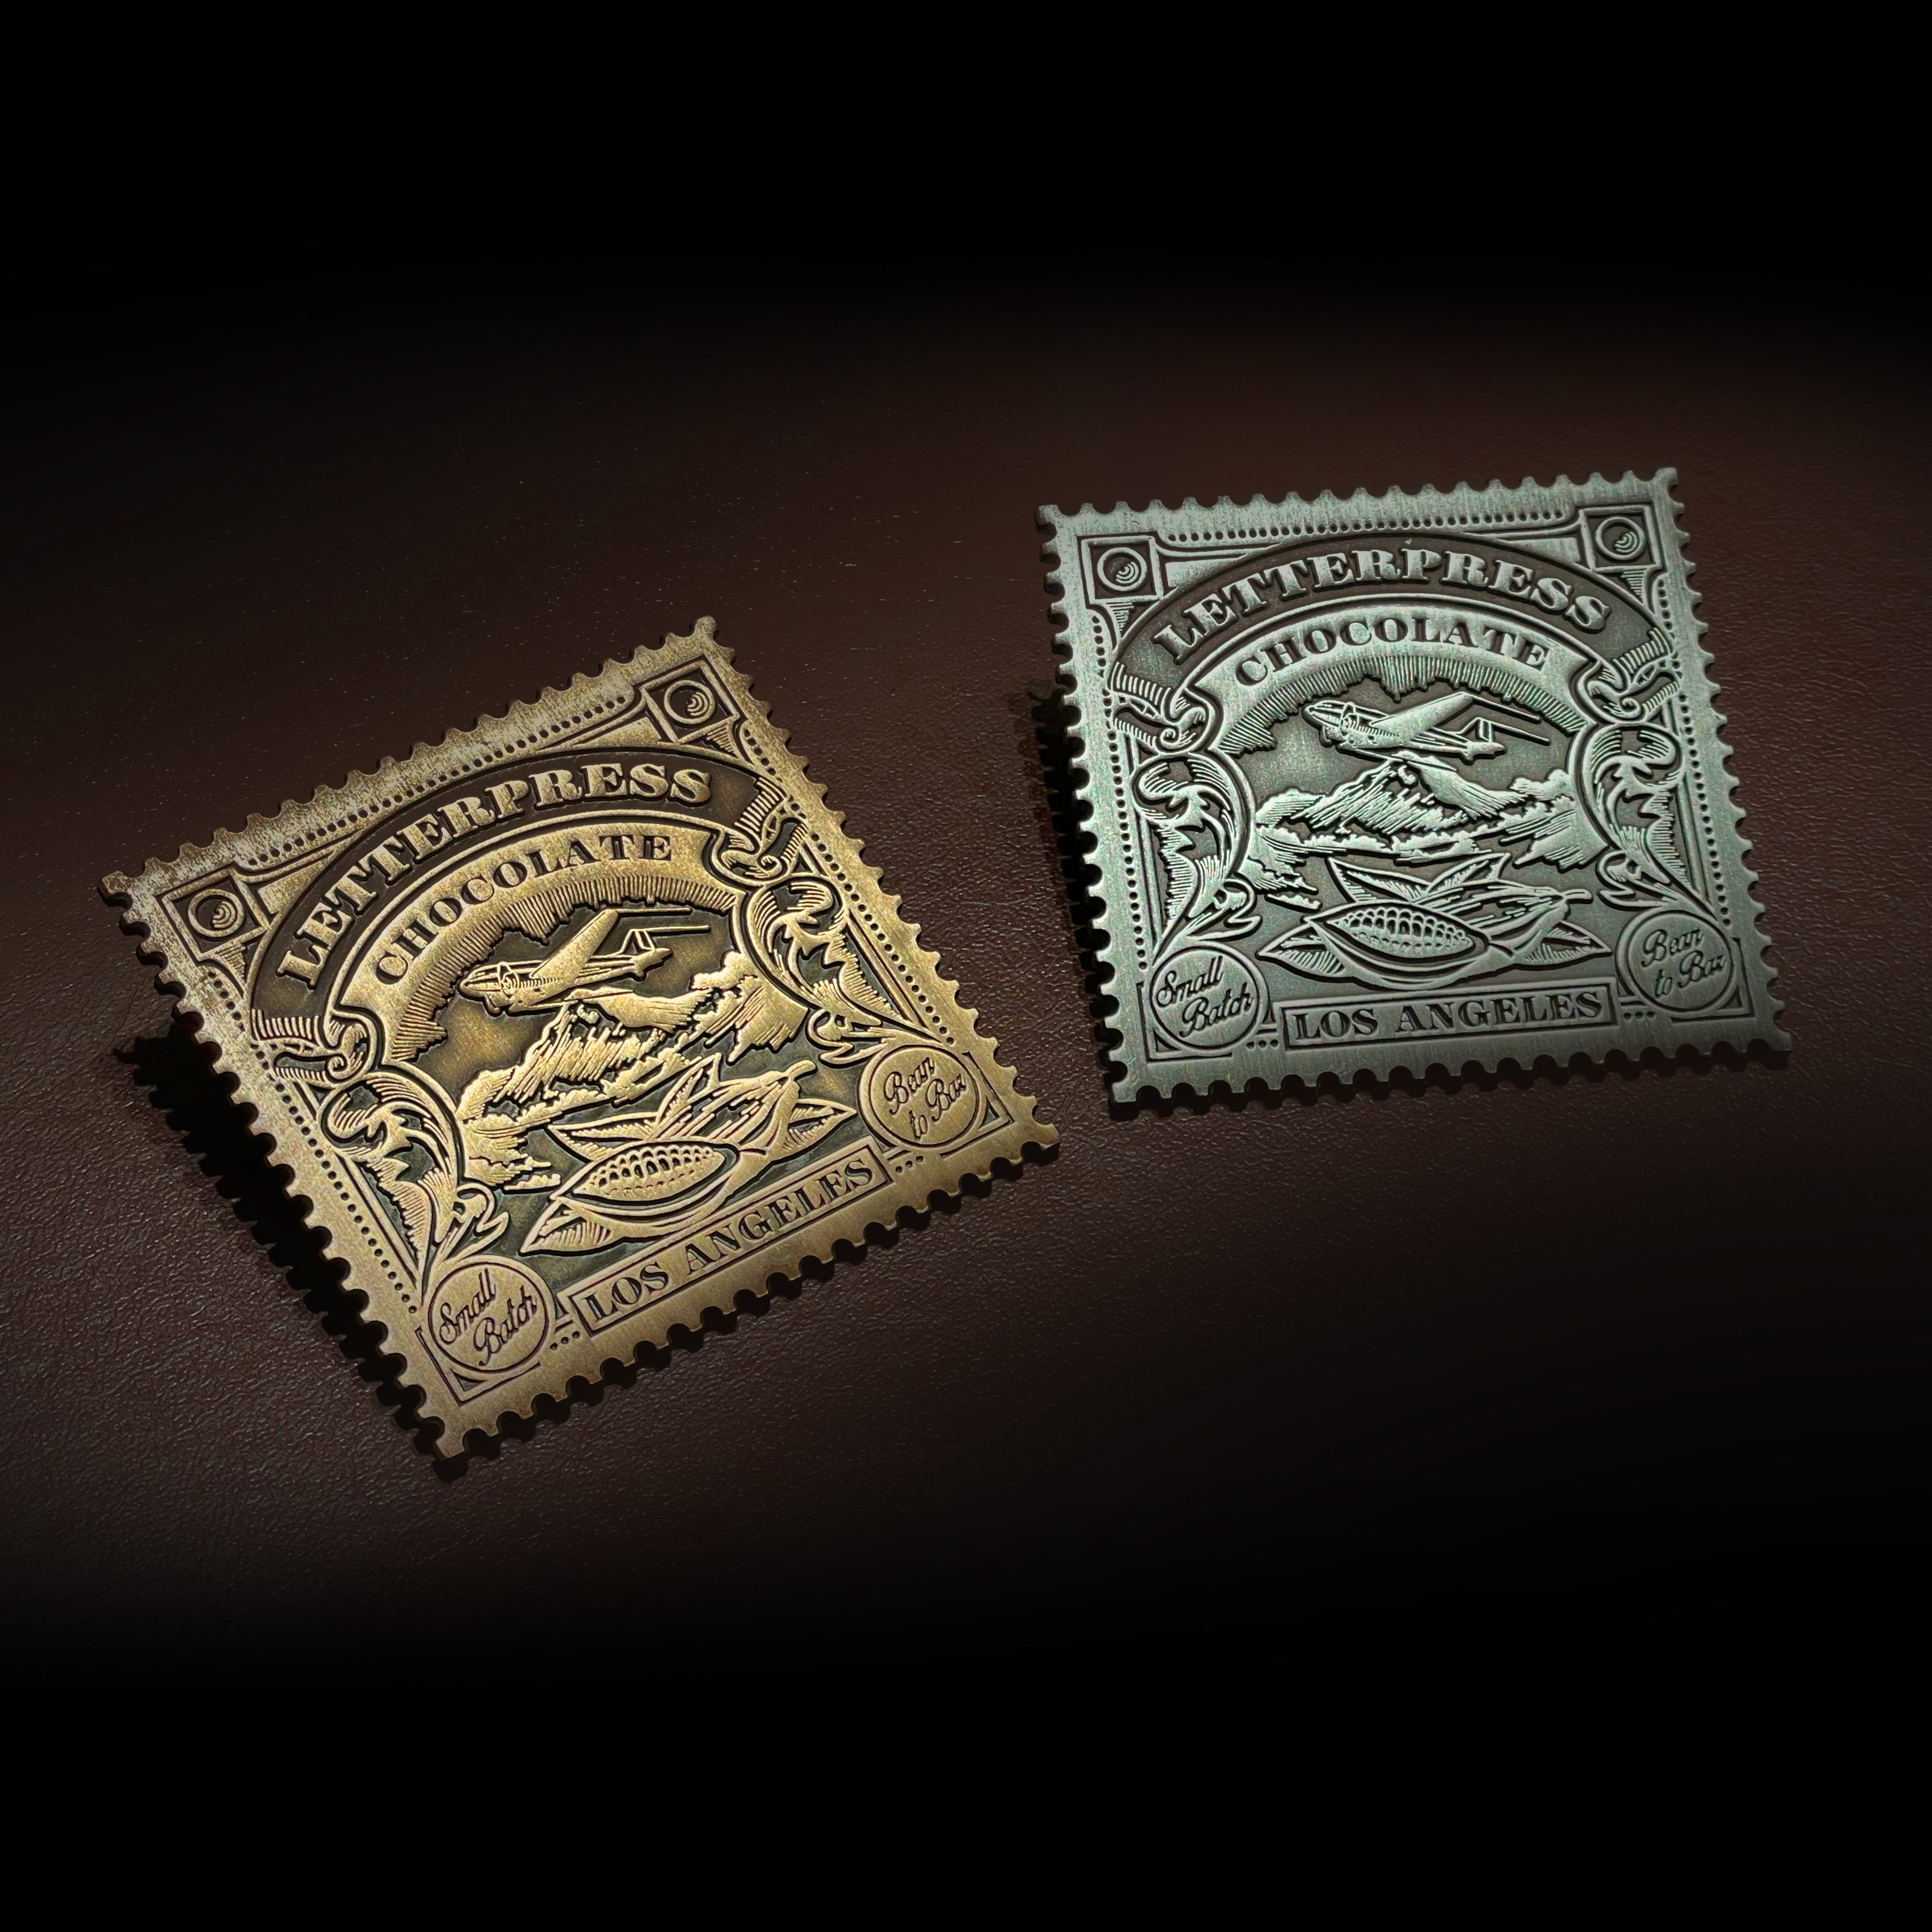 Gold and Silver pins with the company logo of a plane over a mountain inset in a 1920s vintage postage stamp design.